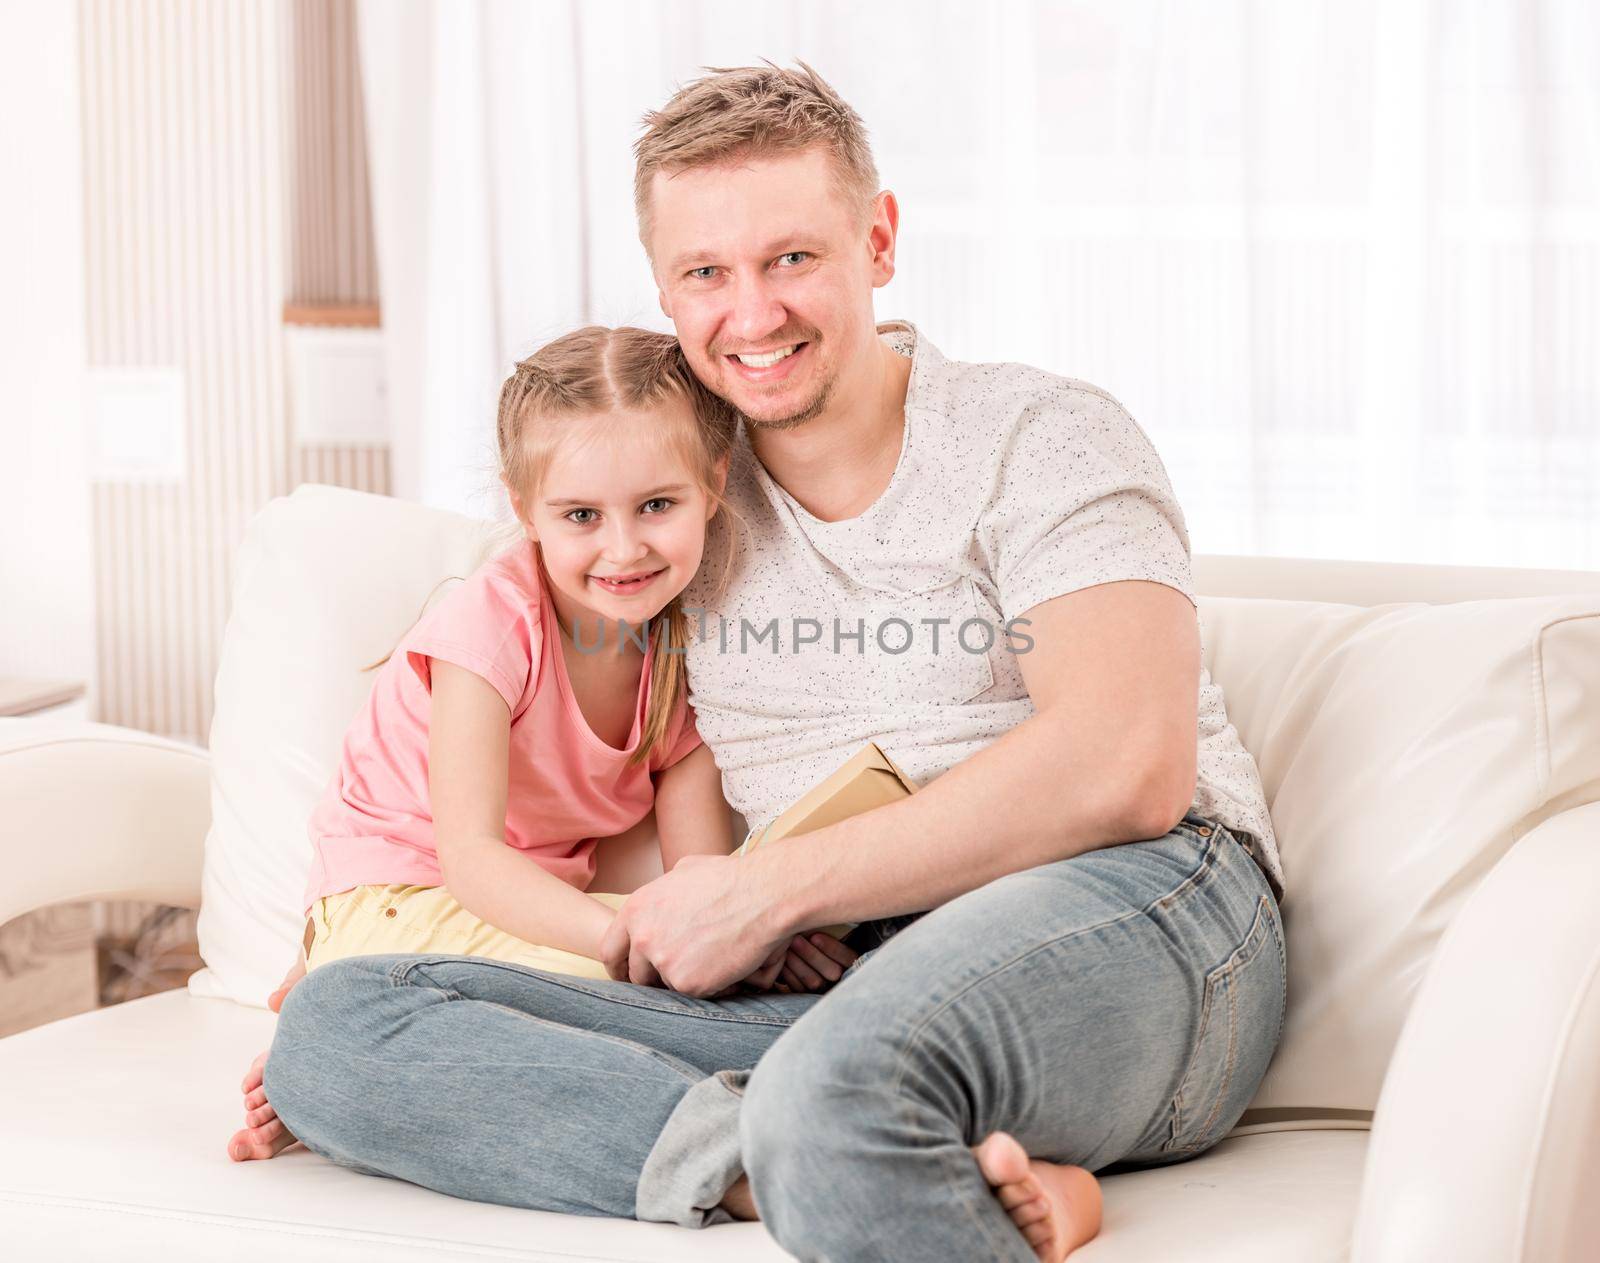 Handsome dad and cutie daughter sitting happy on the beige couch in guest room, with a fathers day gift